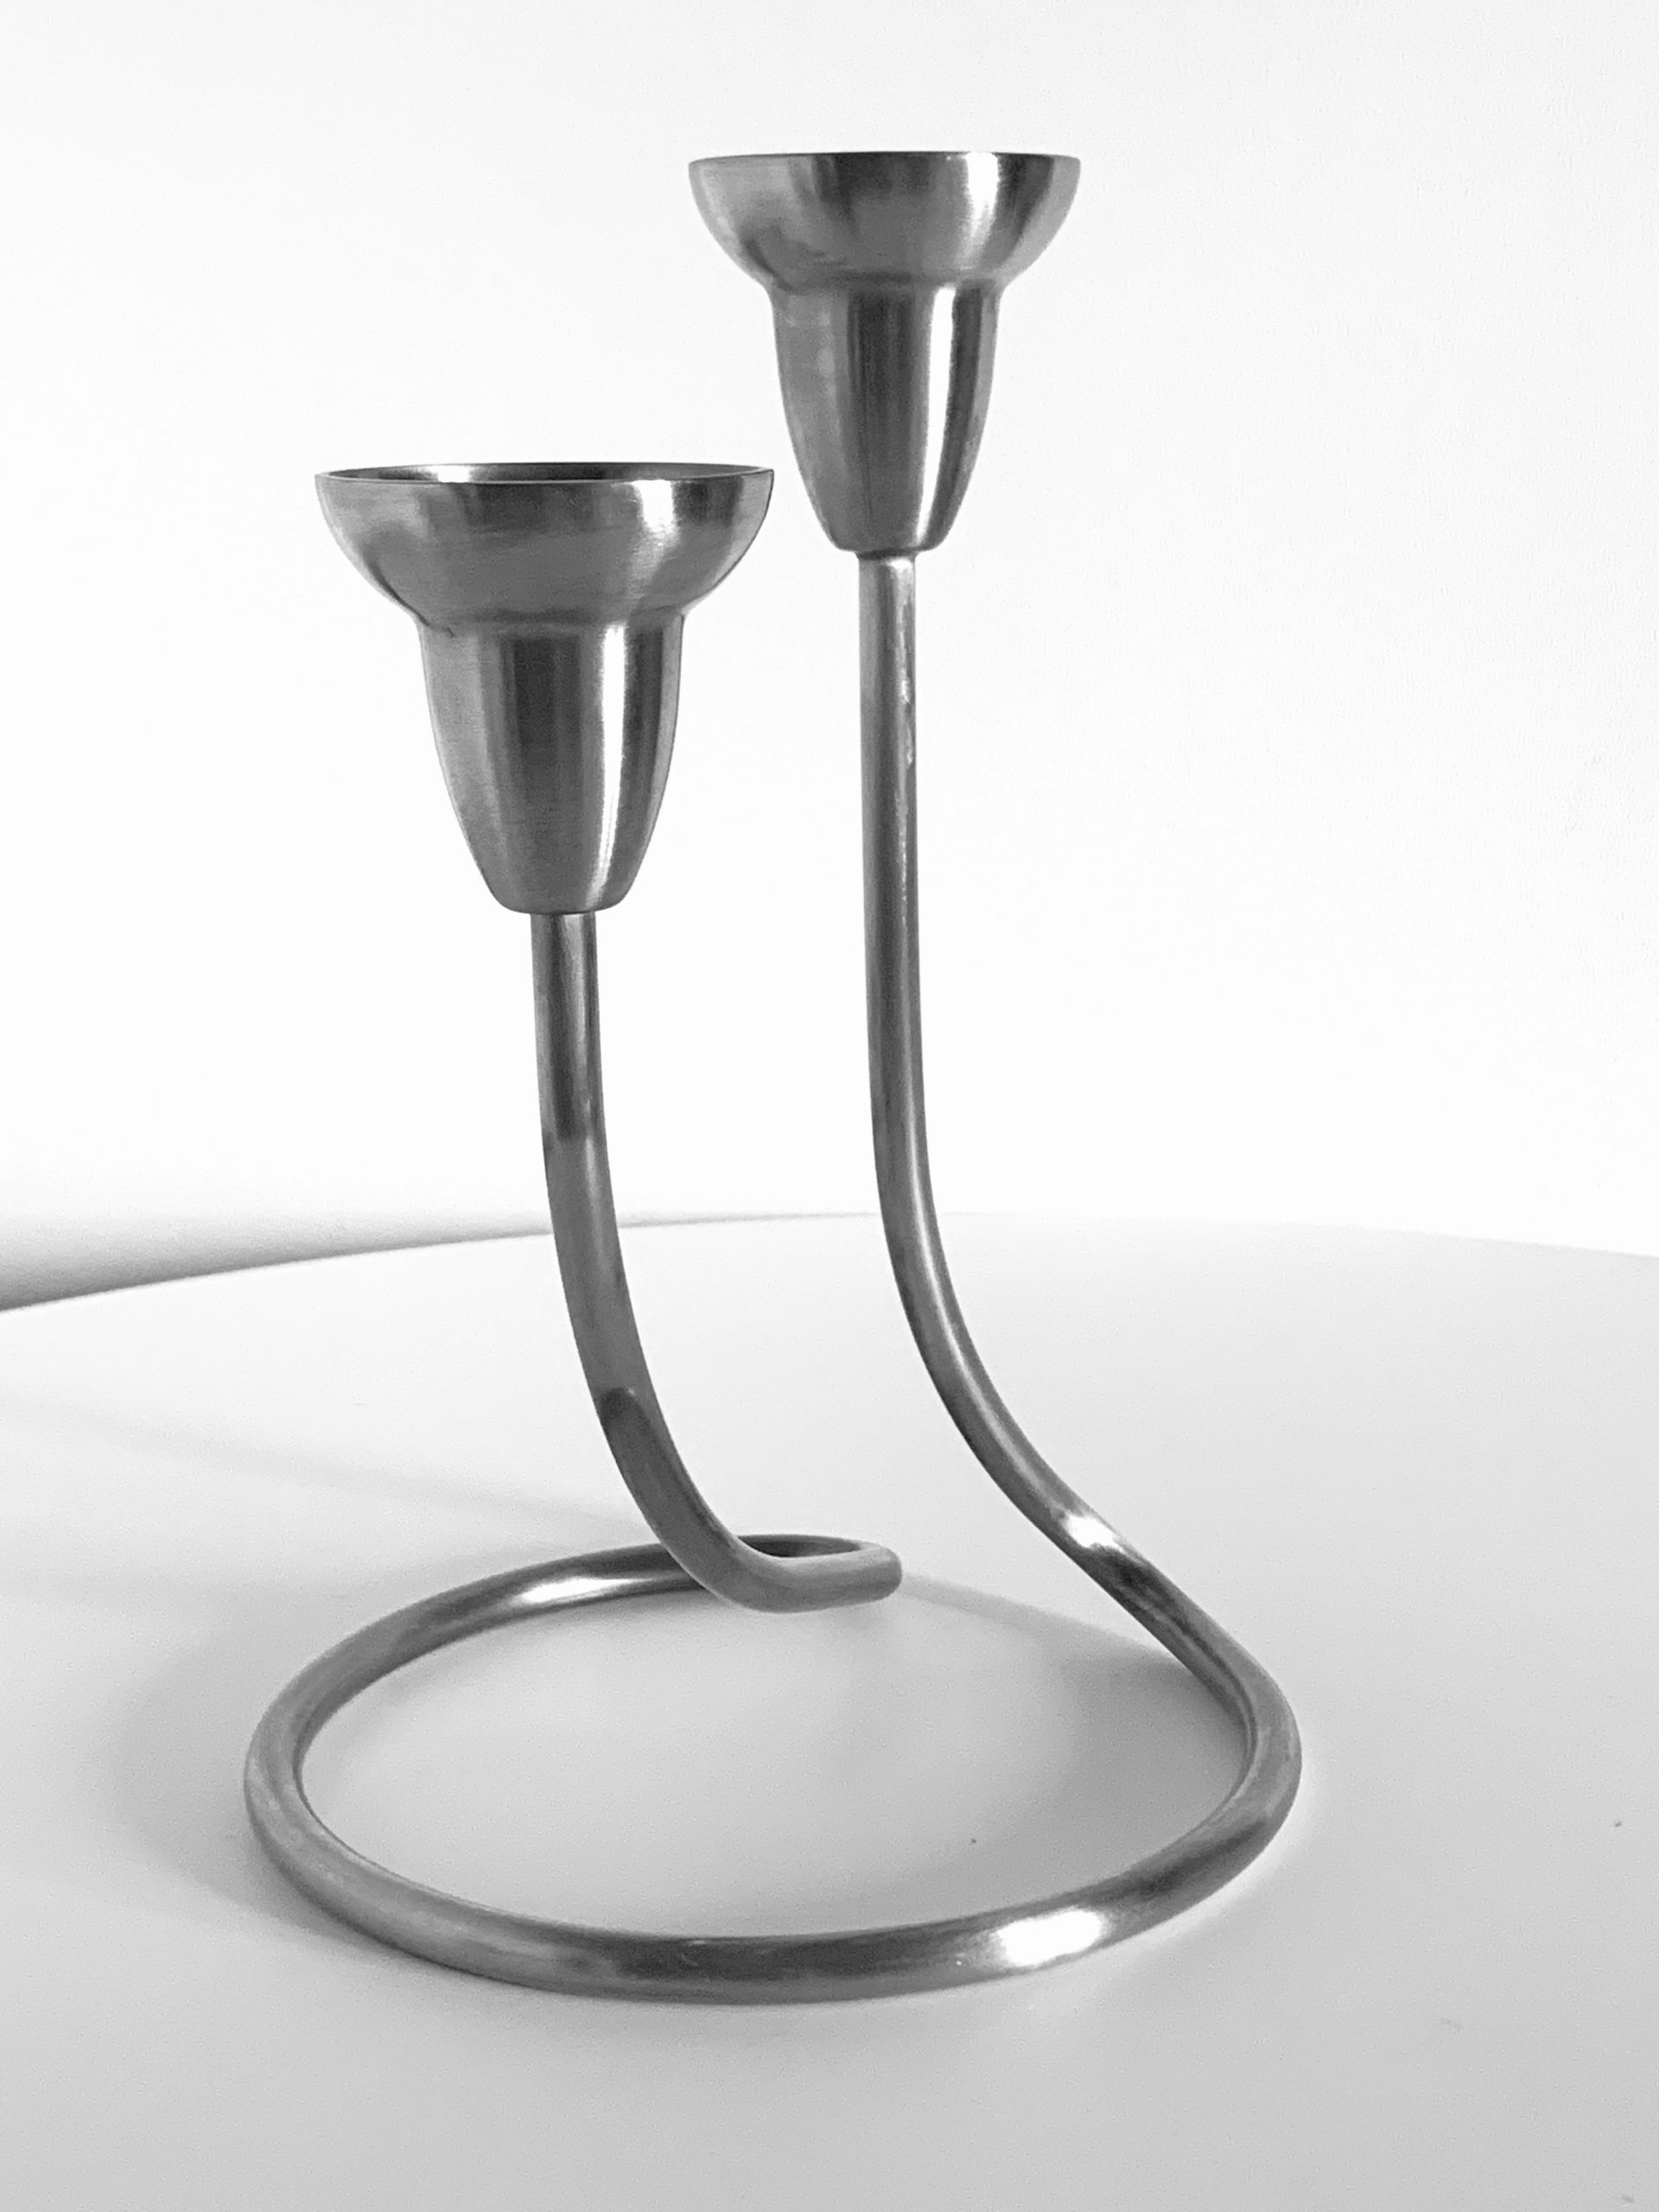 Image of the Georg Jensen Swing candleholder offered in this ad